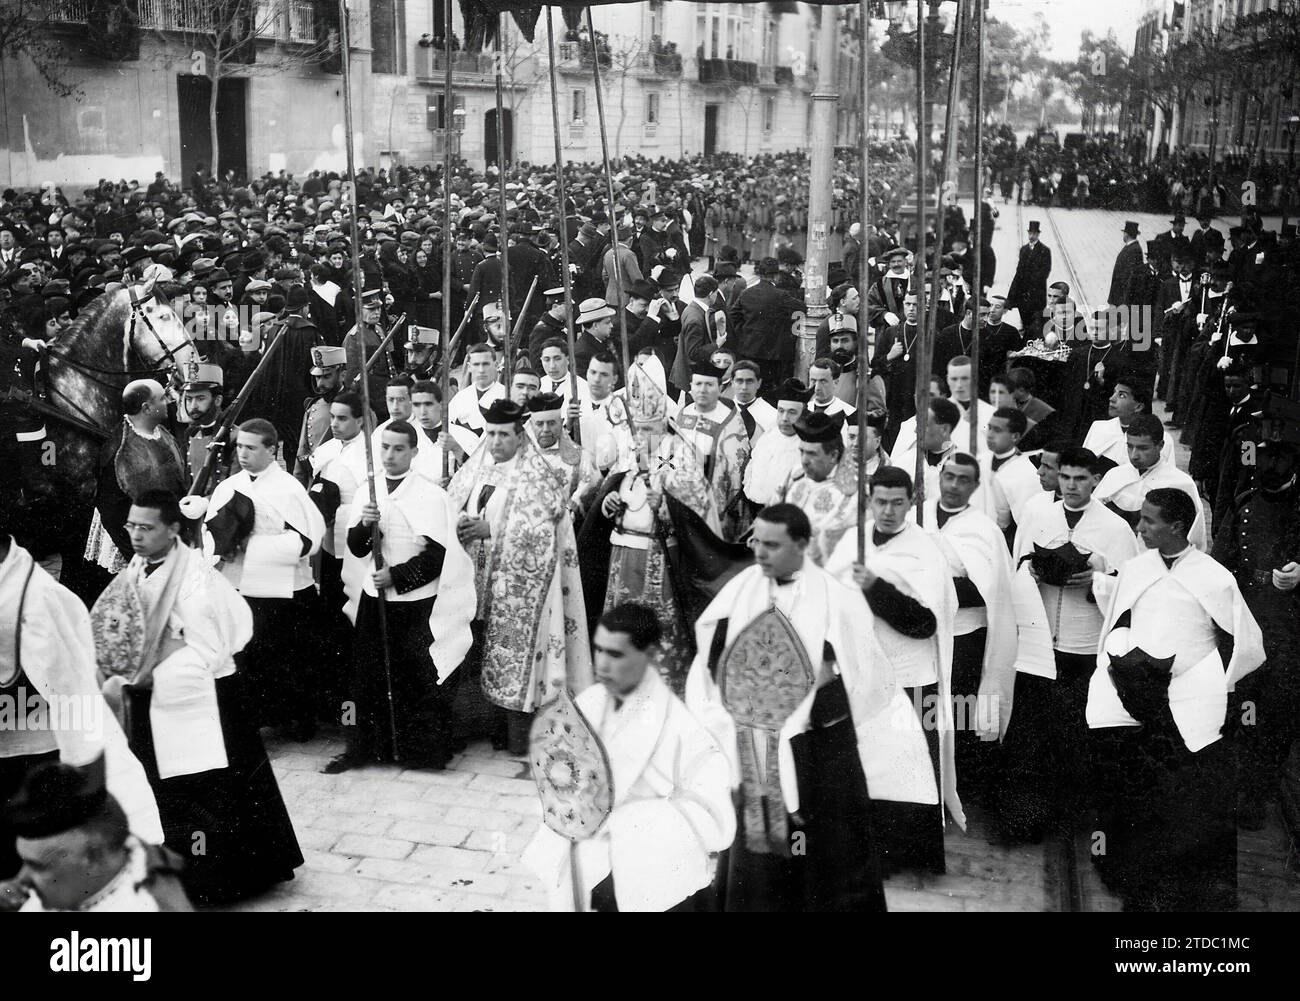 02/28/1917. The new archbishop of Valencia. The prelate Mr. Salvador y Barrera (X), after vesting at the altar in the Plaza de Tetuán, heading under a canopy into the city. Credit: Album / Archivo ABC / Vicente Barbera Masip Stock Photo